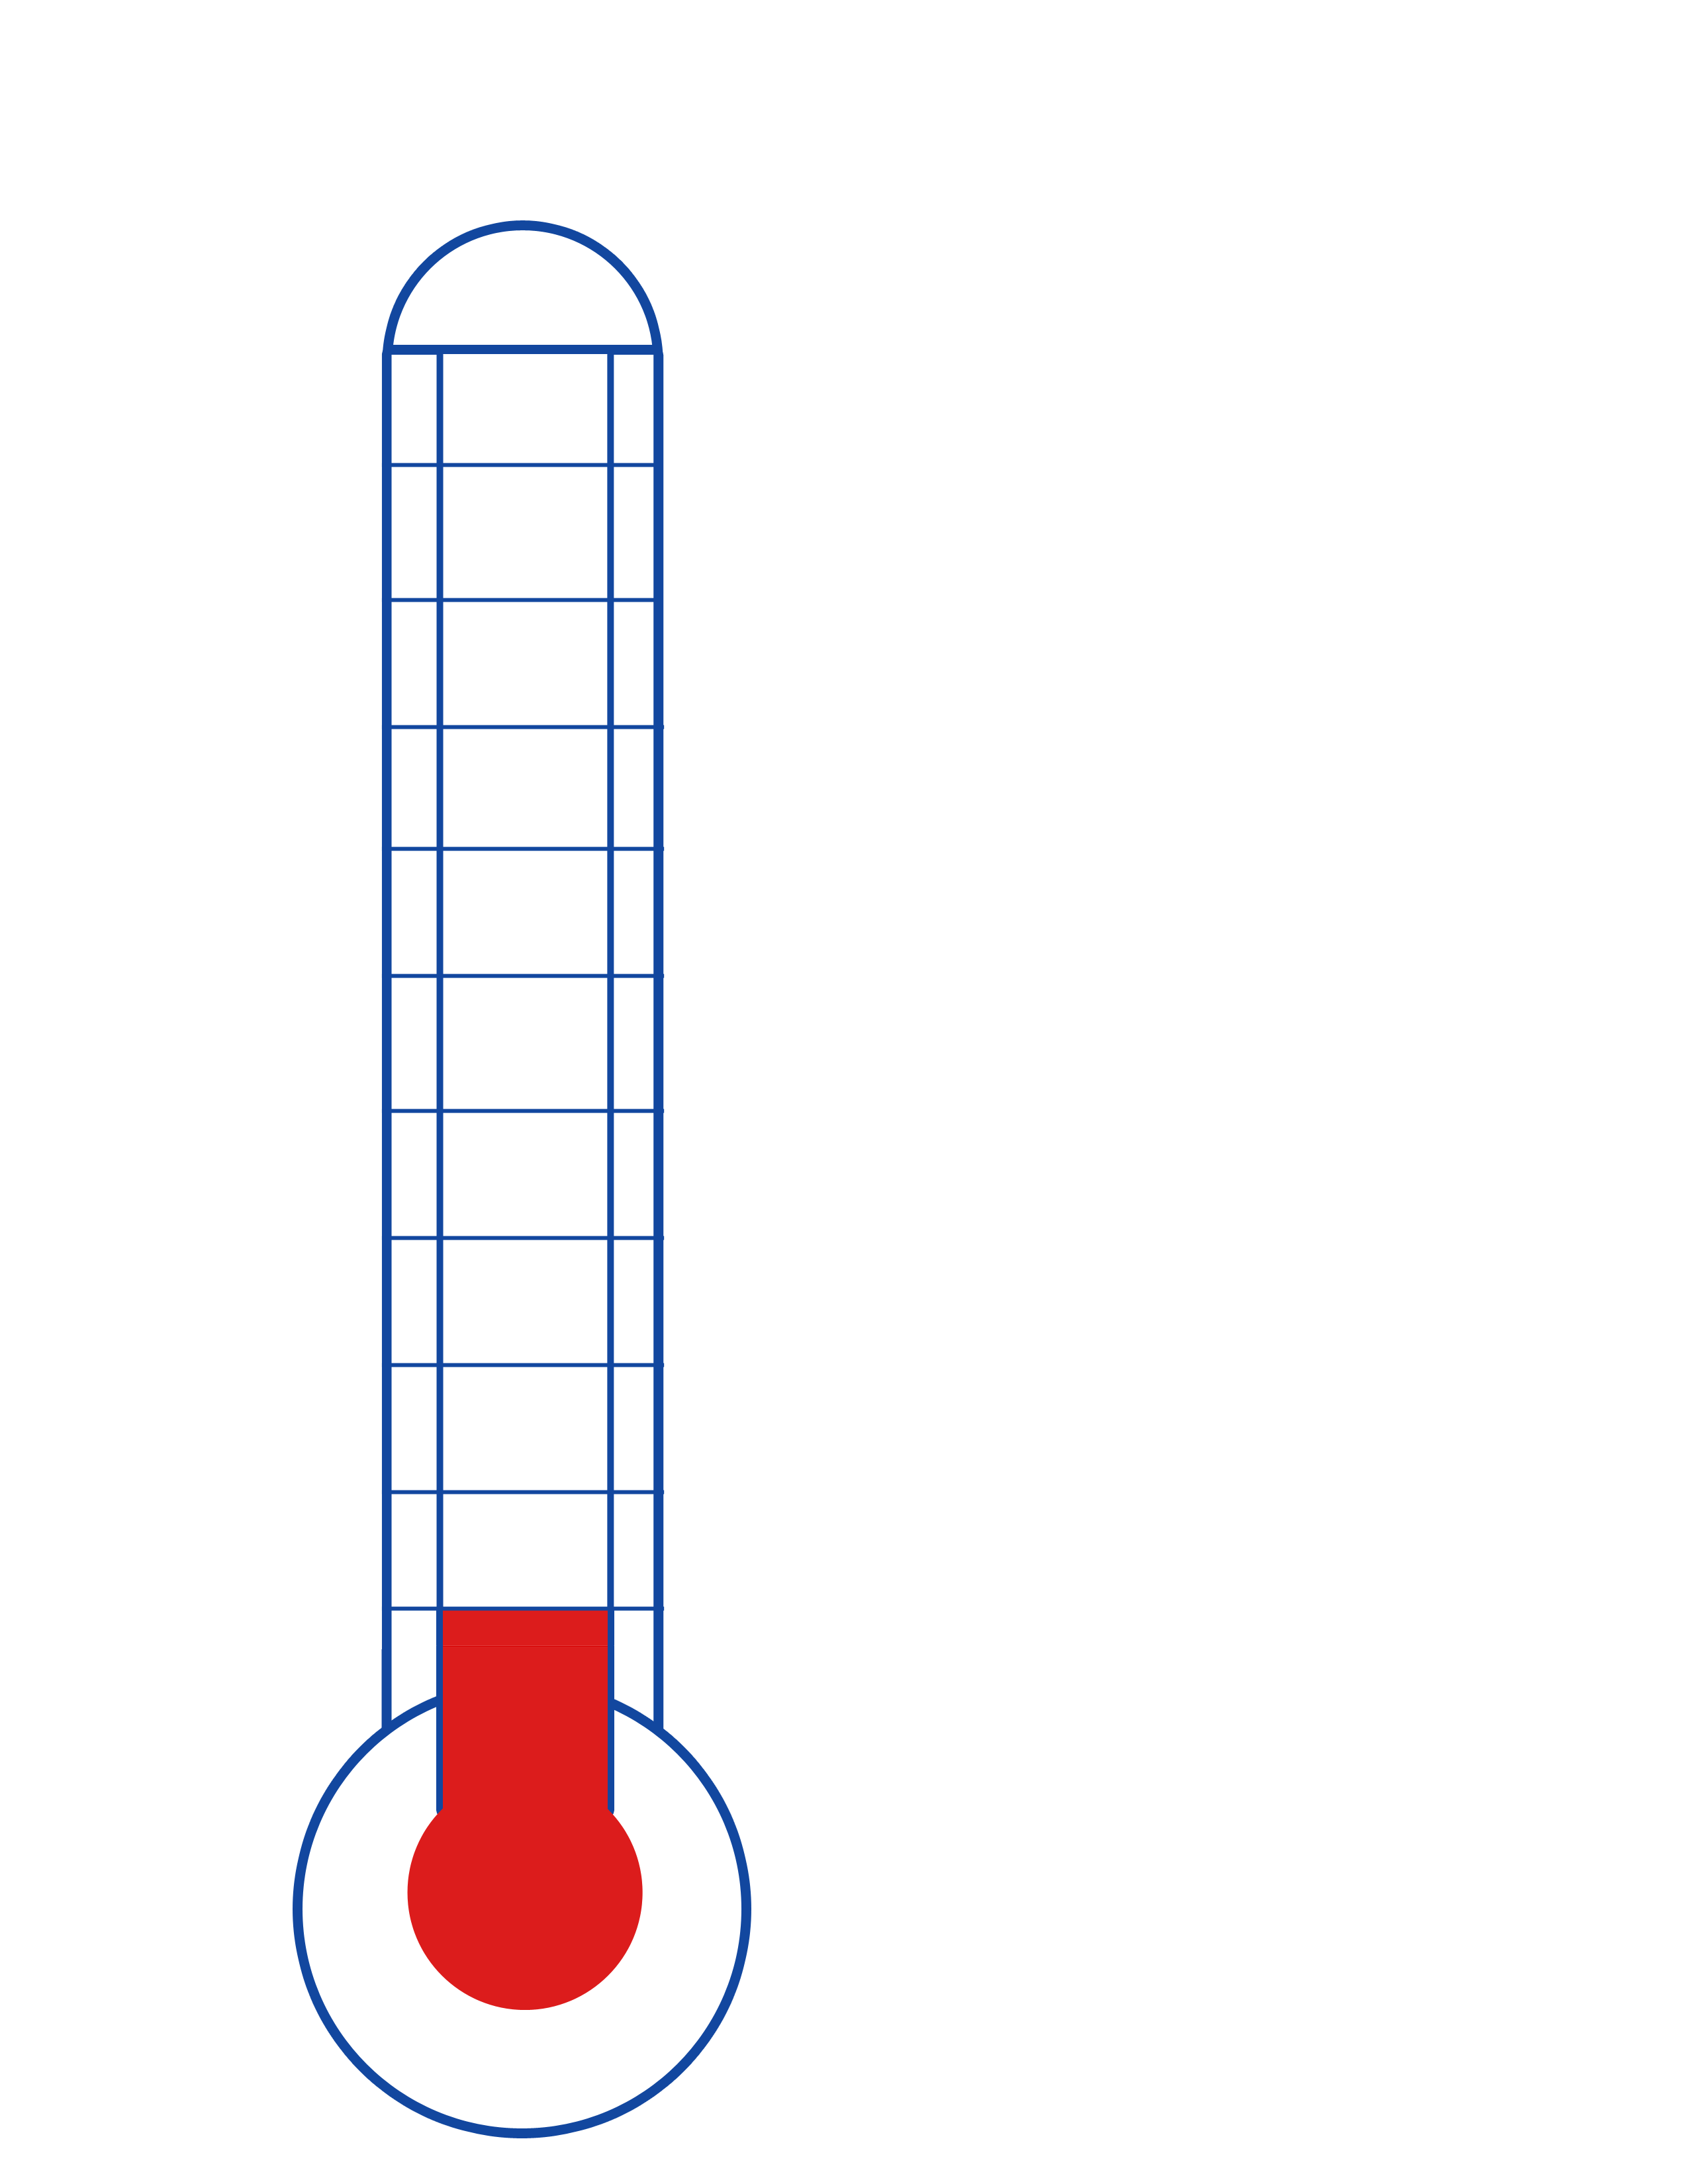 Thermometer Template, Fundraising, Goal, Blank & Printable ...